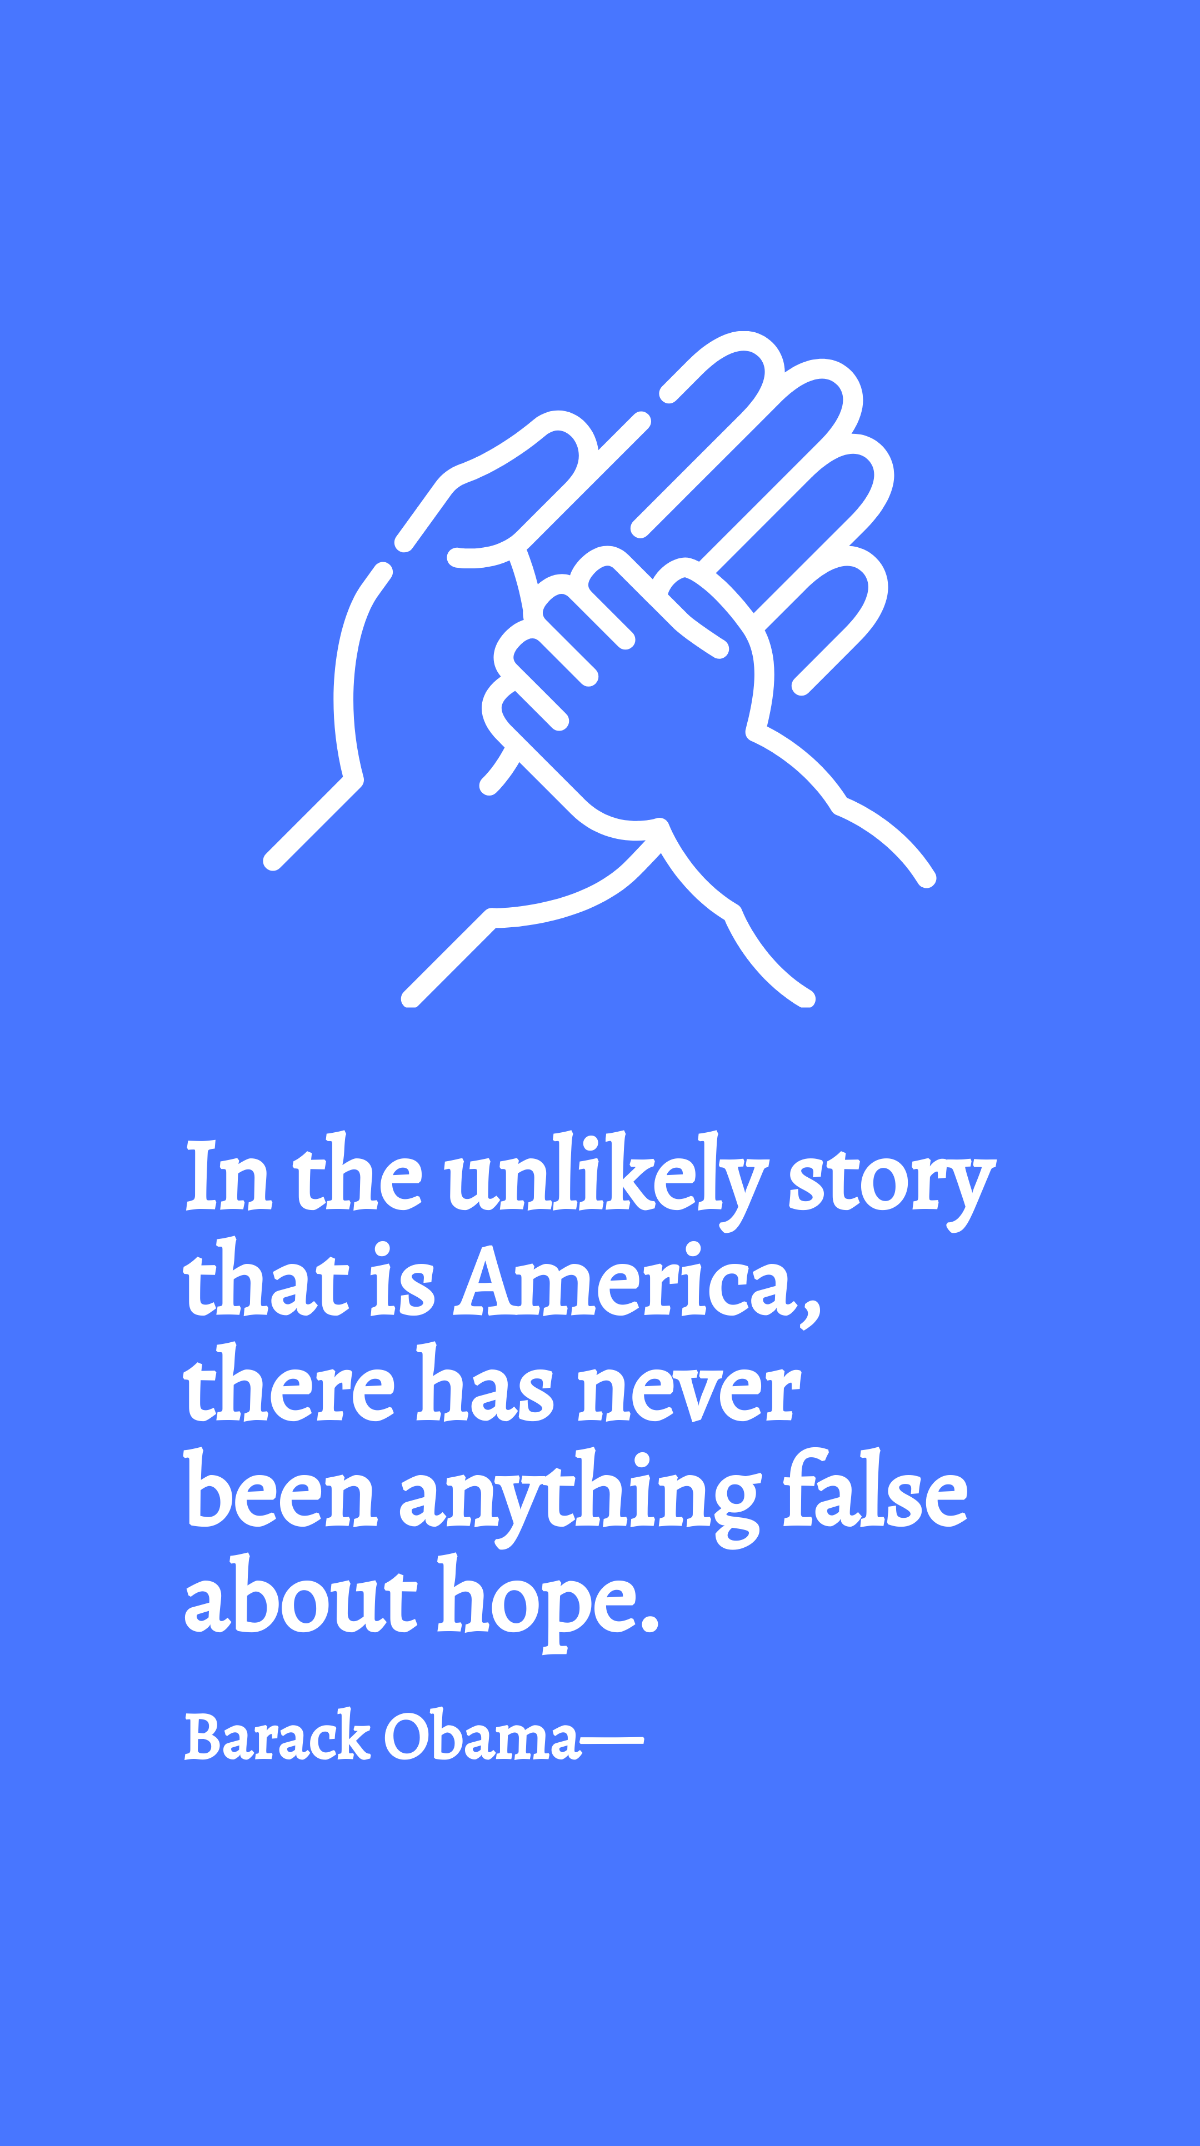 Barack Obama - In the unlikely story that is America, there has never been anything false about hope Template